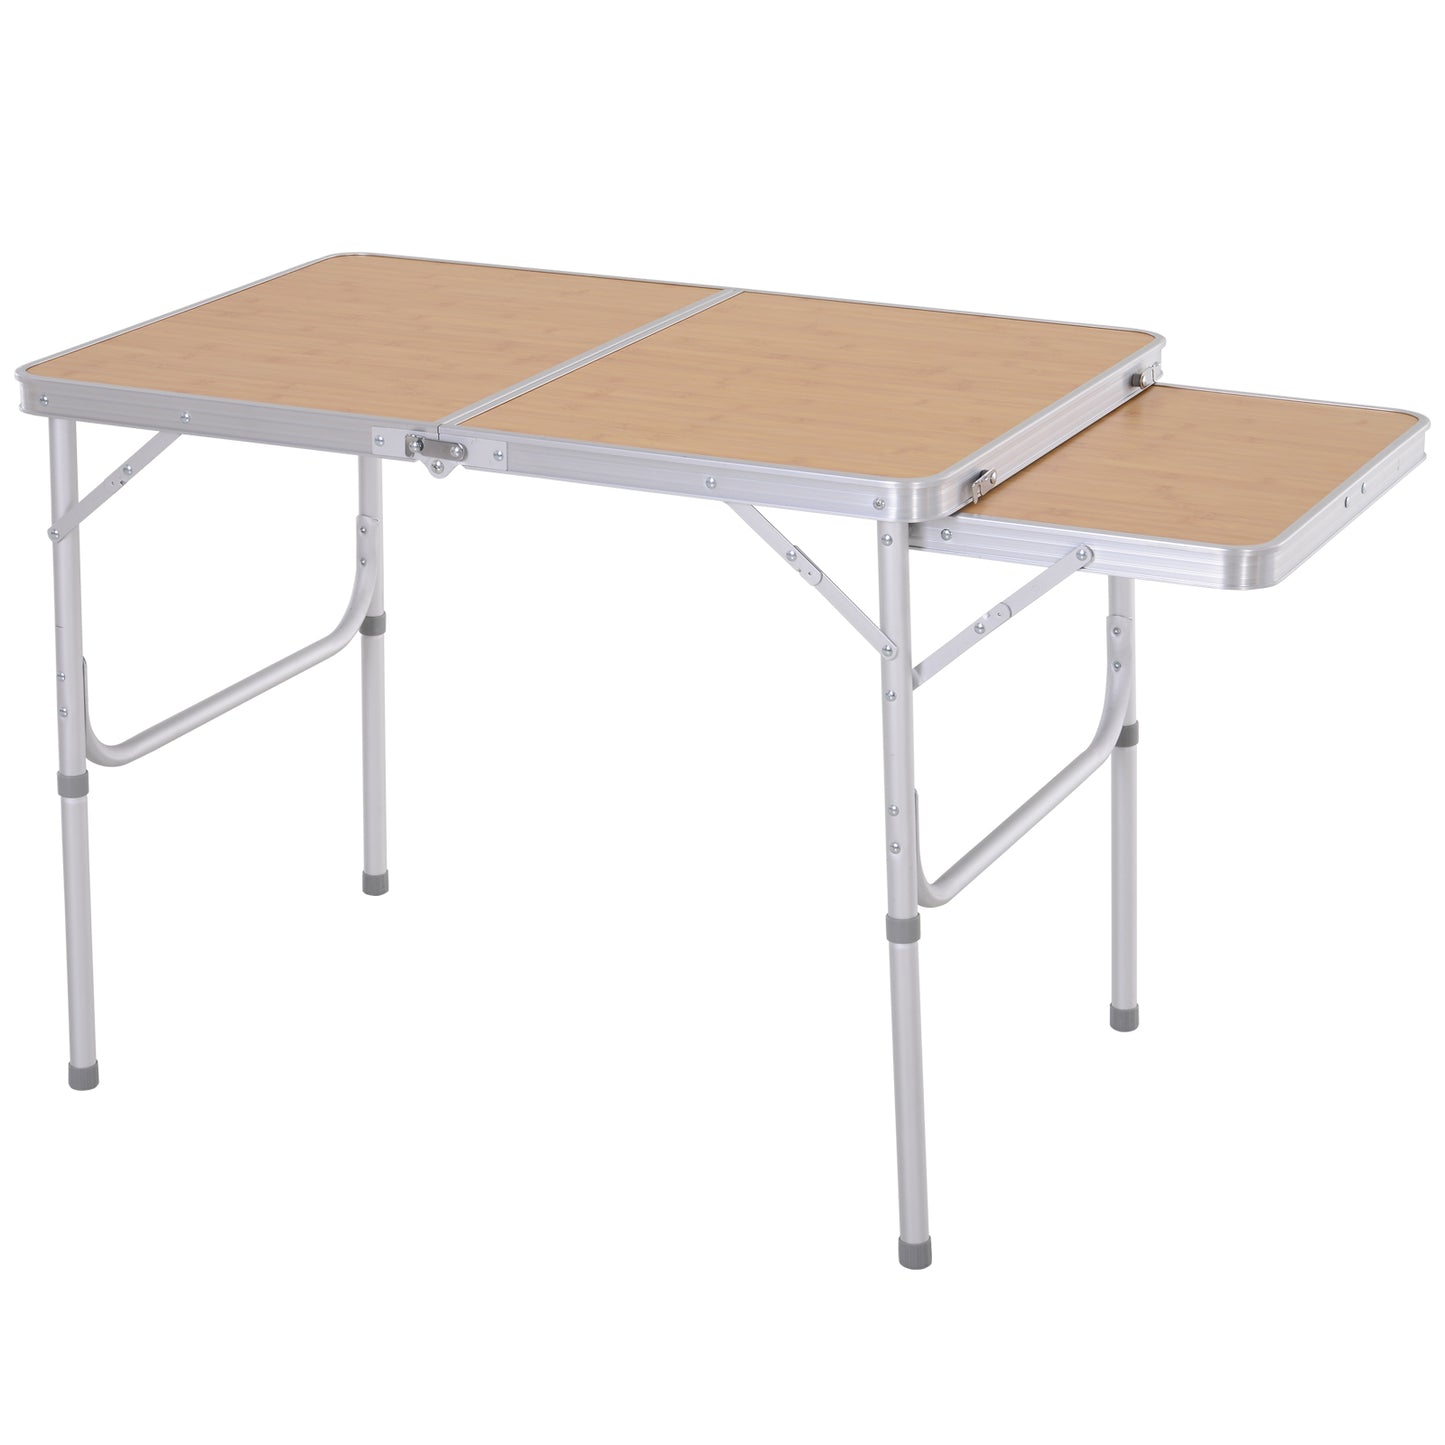 Outsunny 3ft Aluminium MDF-Top Folding Picnic Table Portable Camping Table